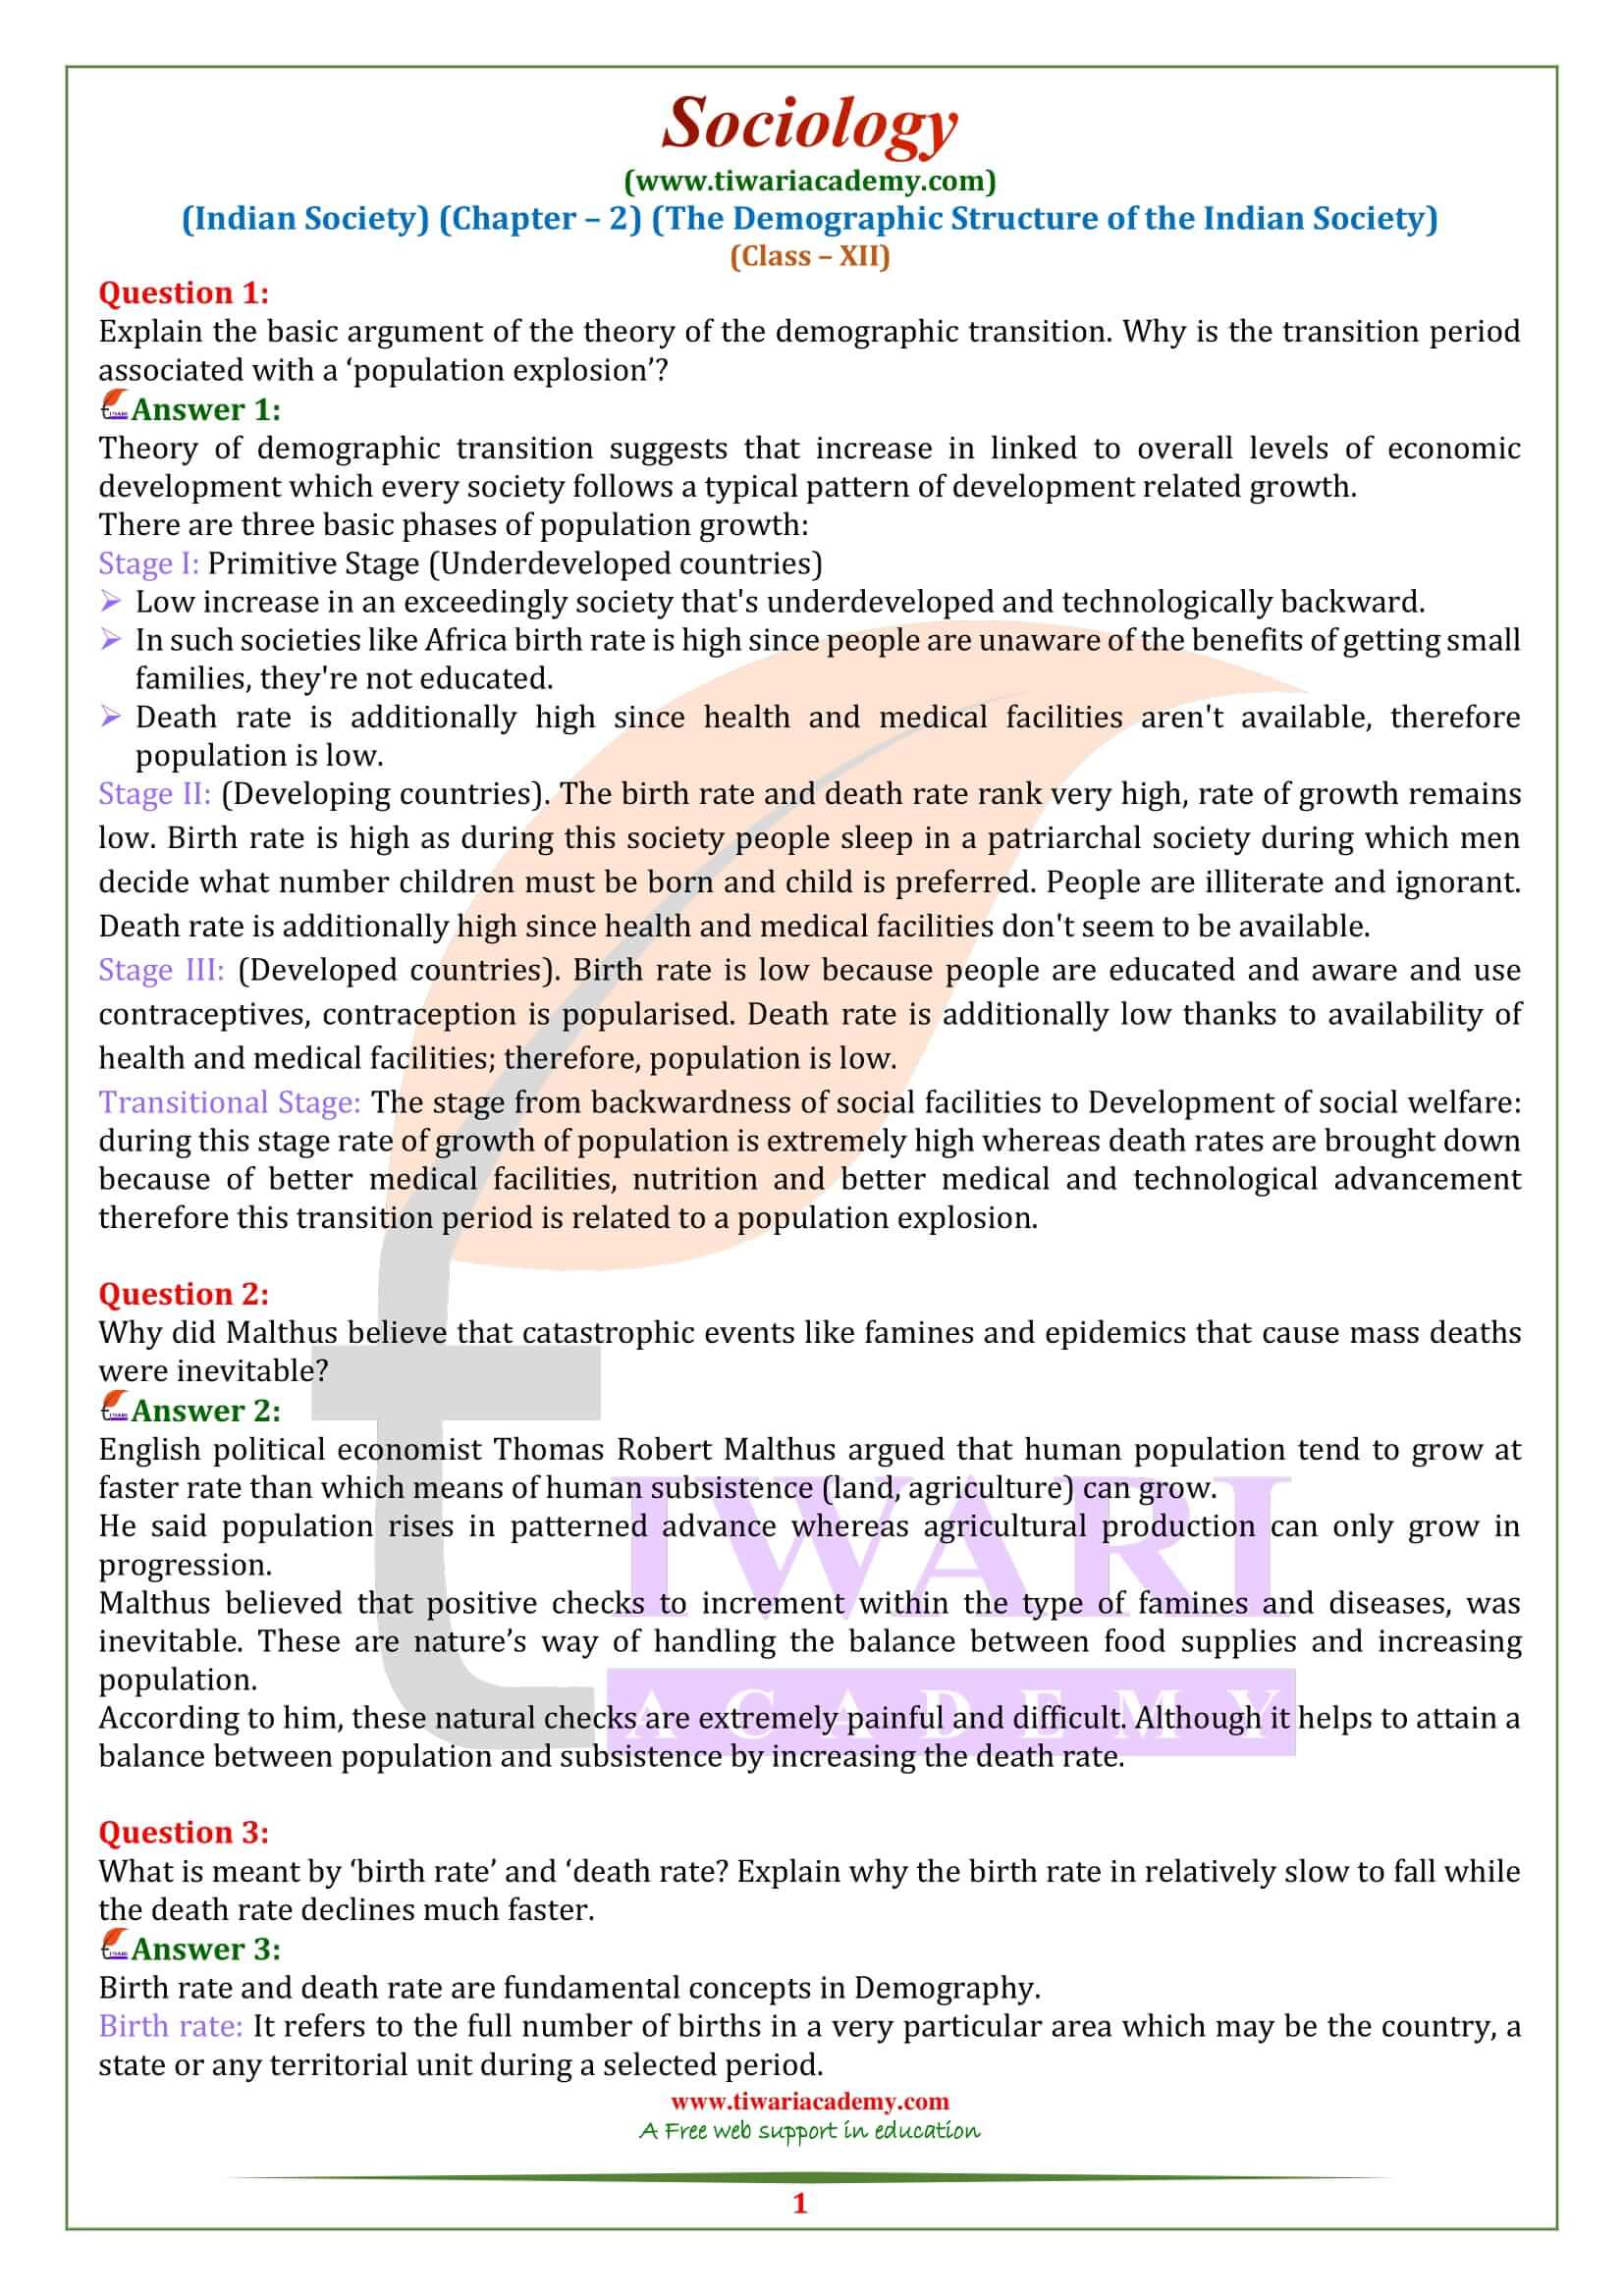 NCERT Solutions for Class 12 Sociology Chapter 2